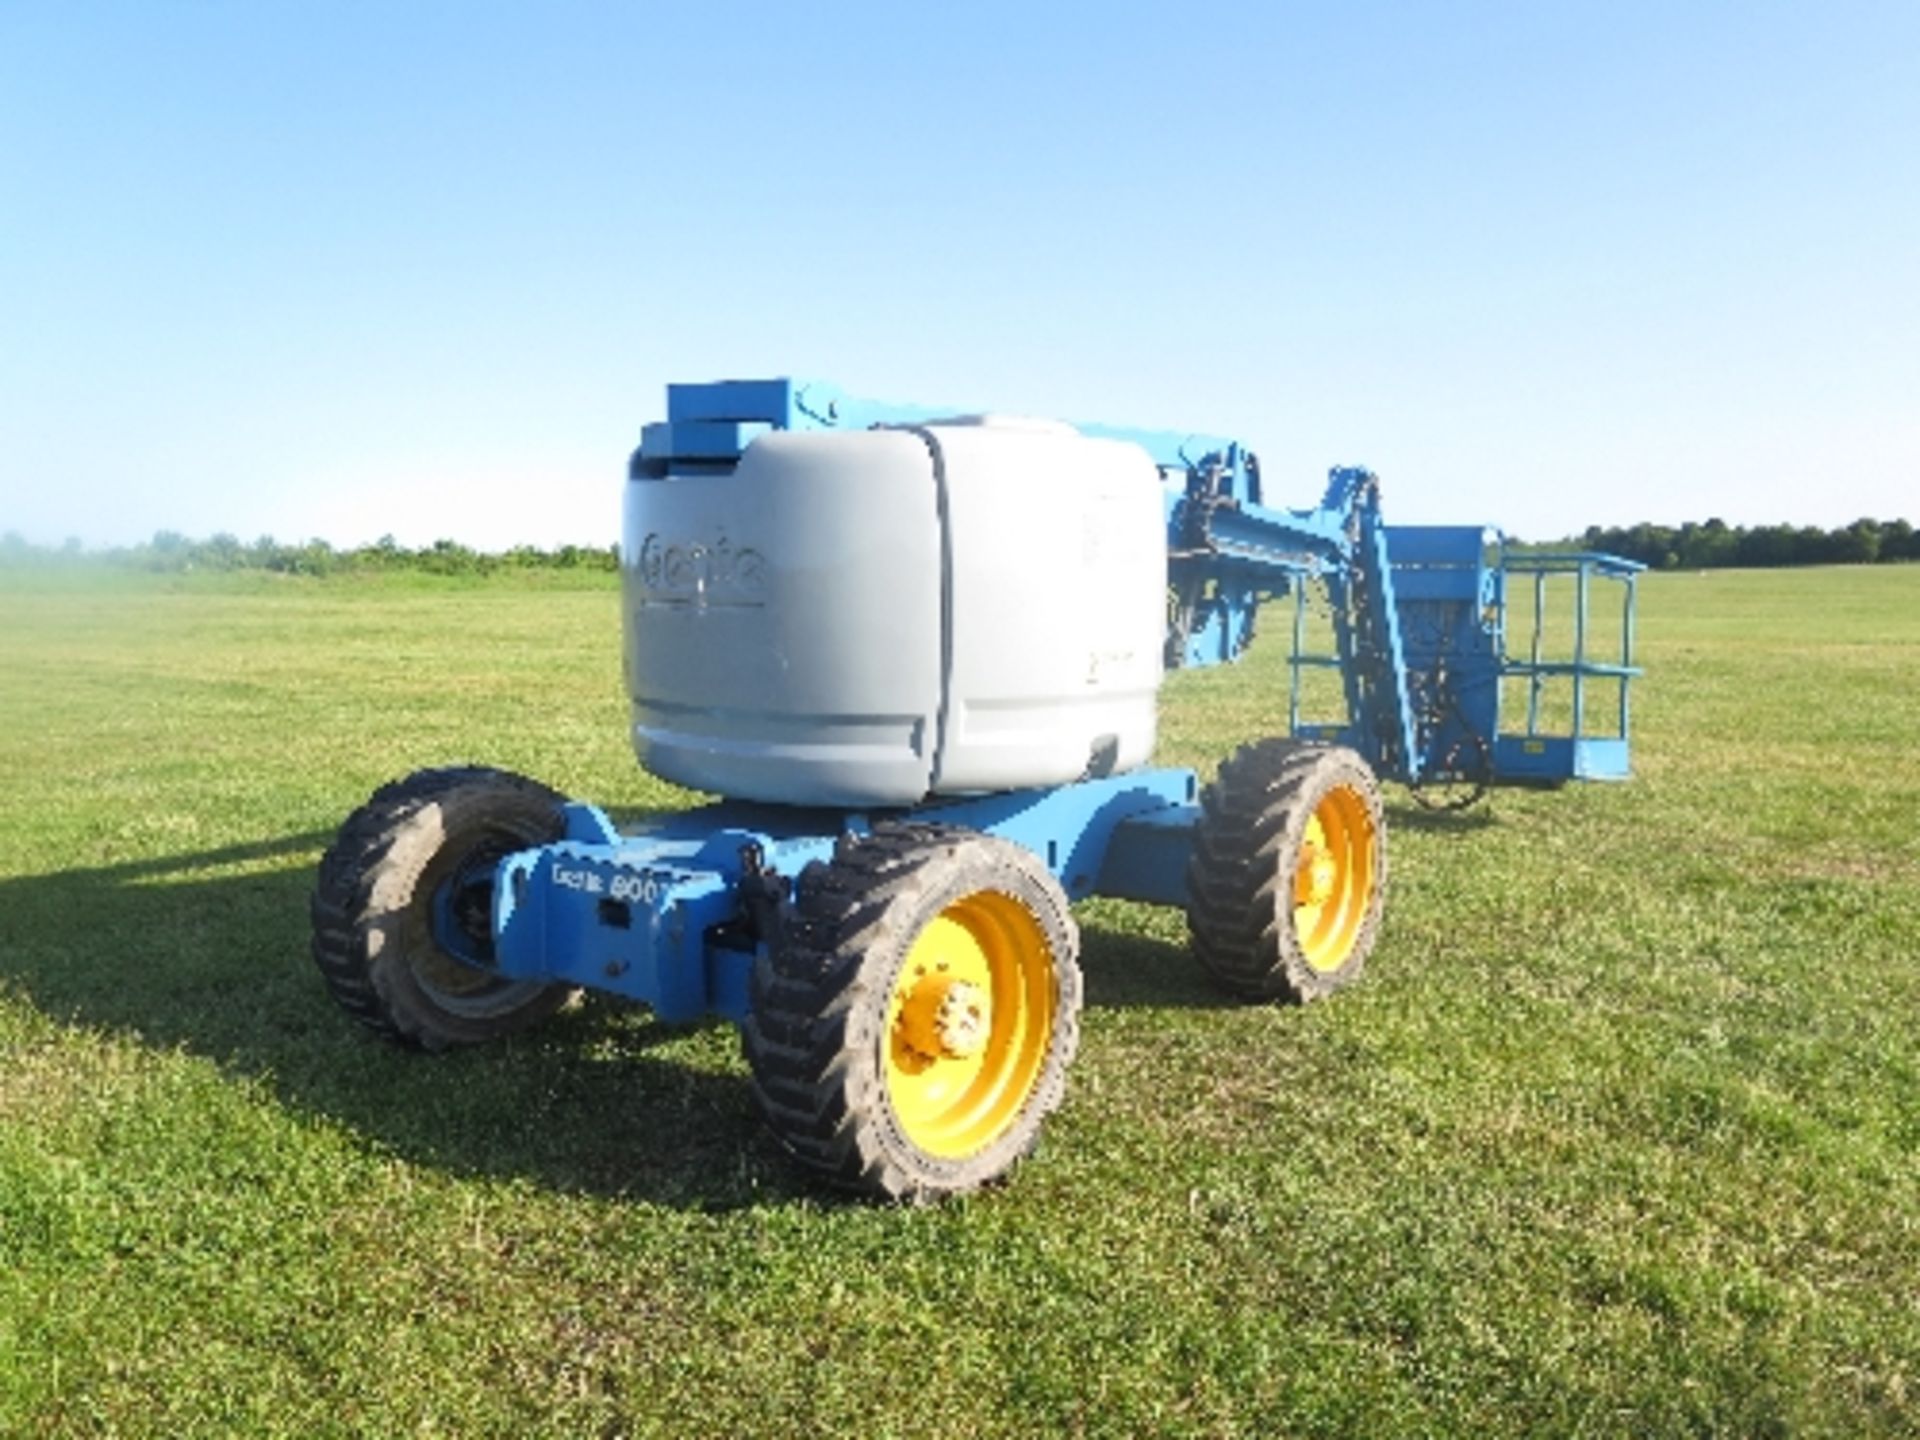 Genie Z45/25 artic boom 2410 hrs 2005 137859ALL LOTS are SOLD AS SEEN WITHOUT WARRANTY expressed,